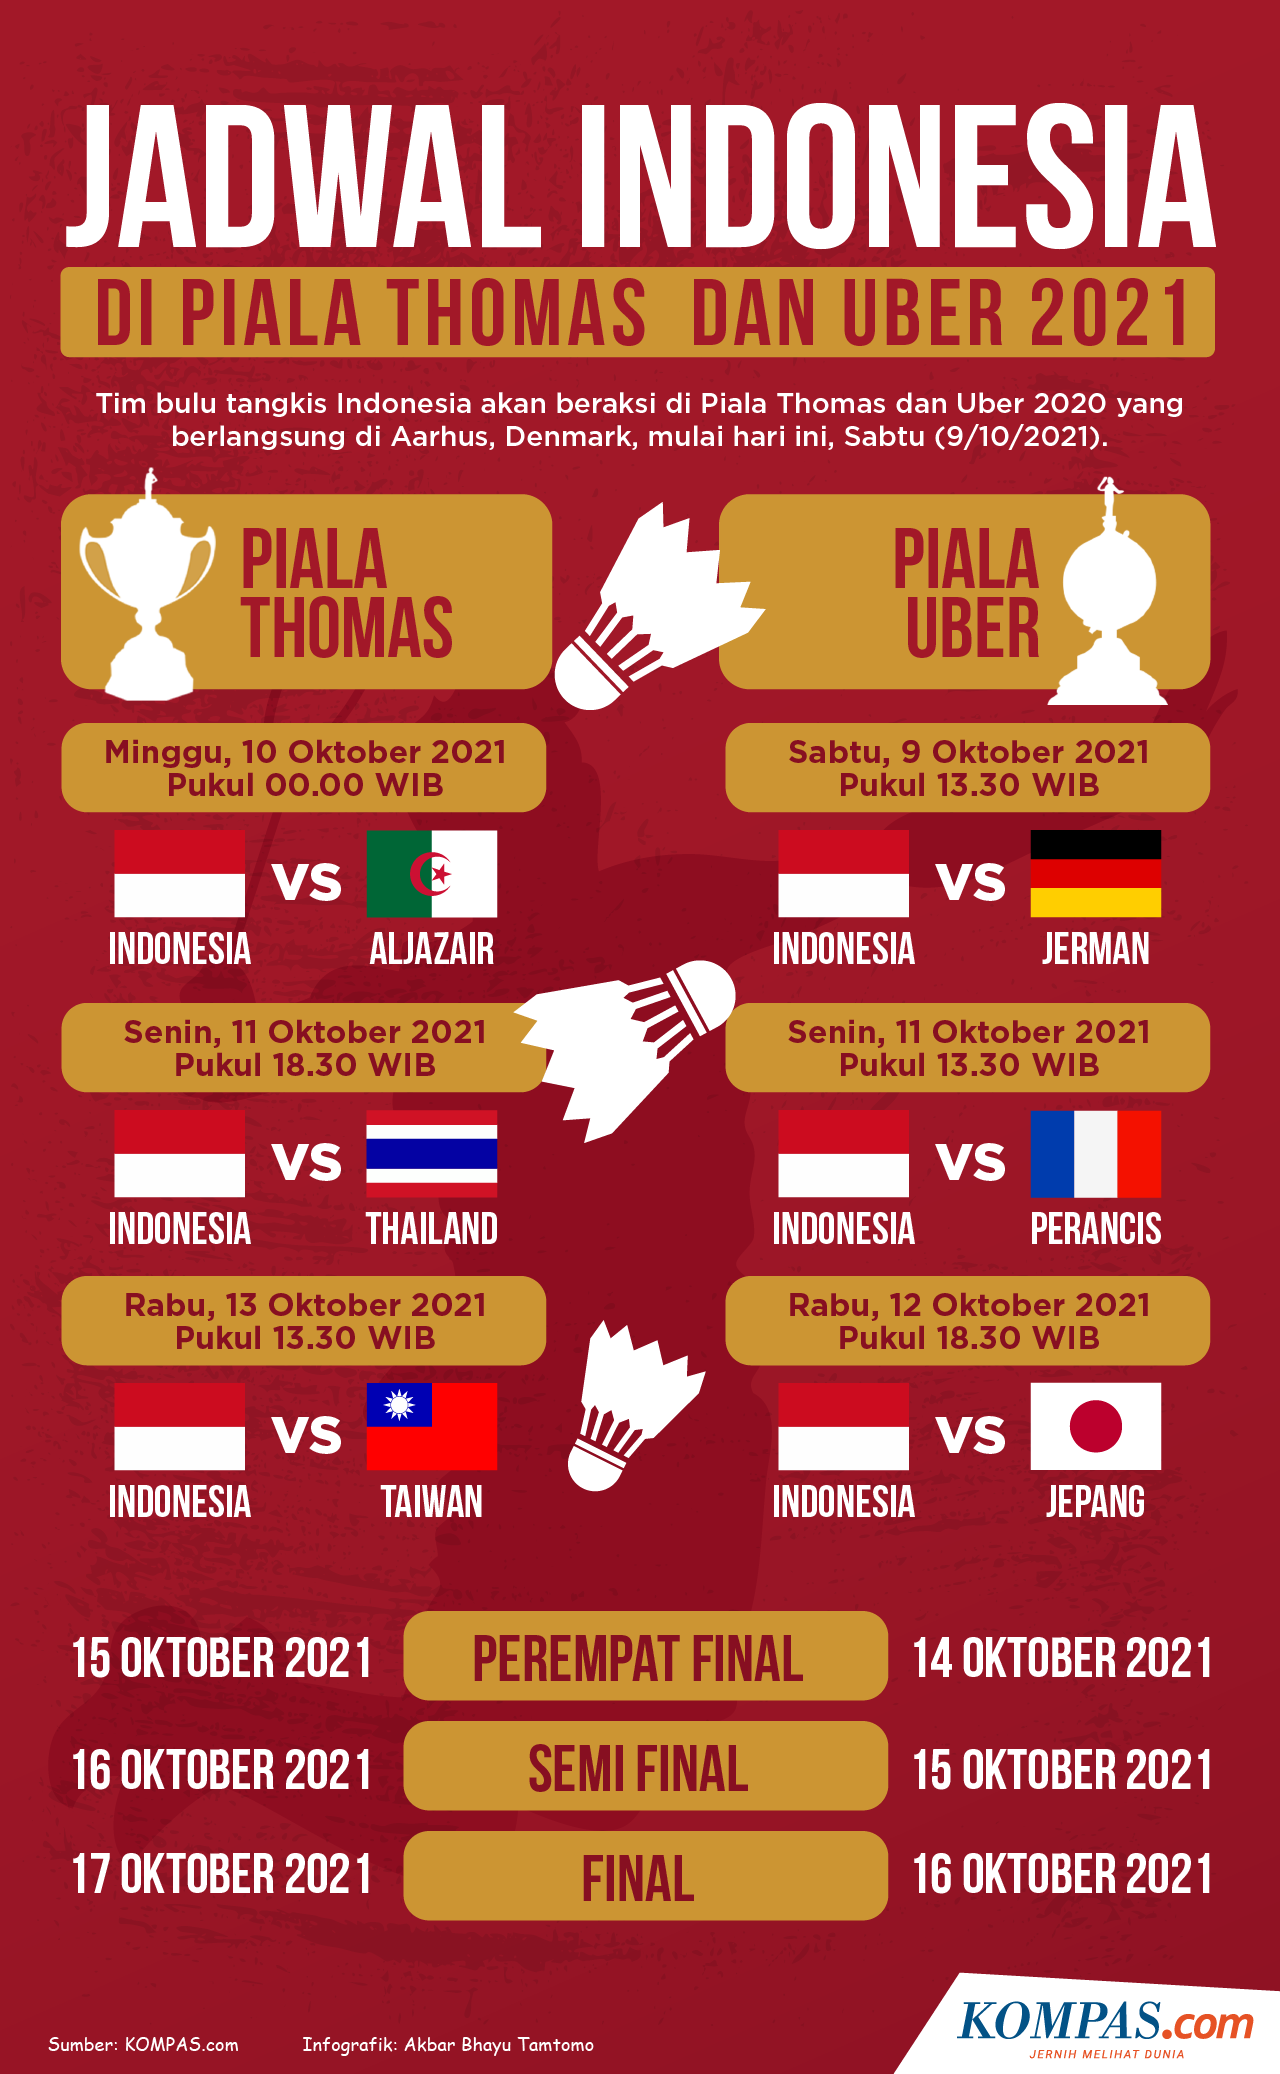 Thomas and uber cup 2021 schedule